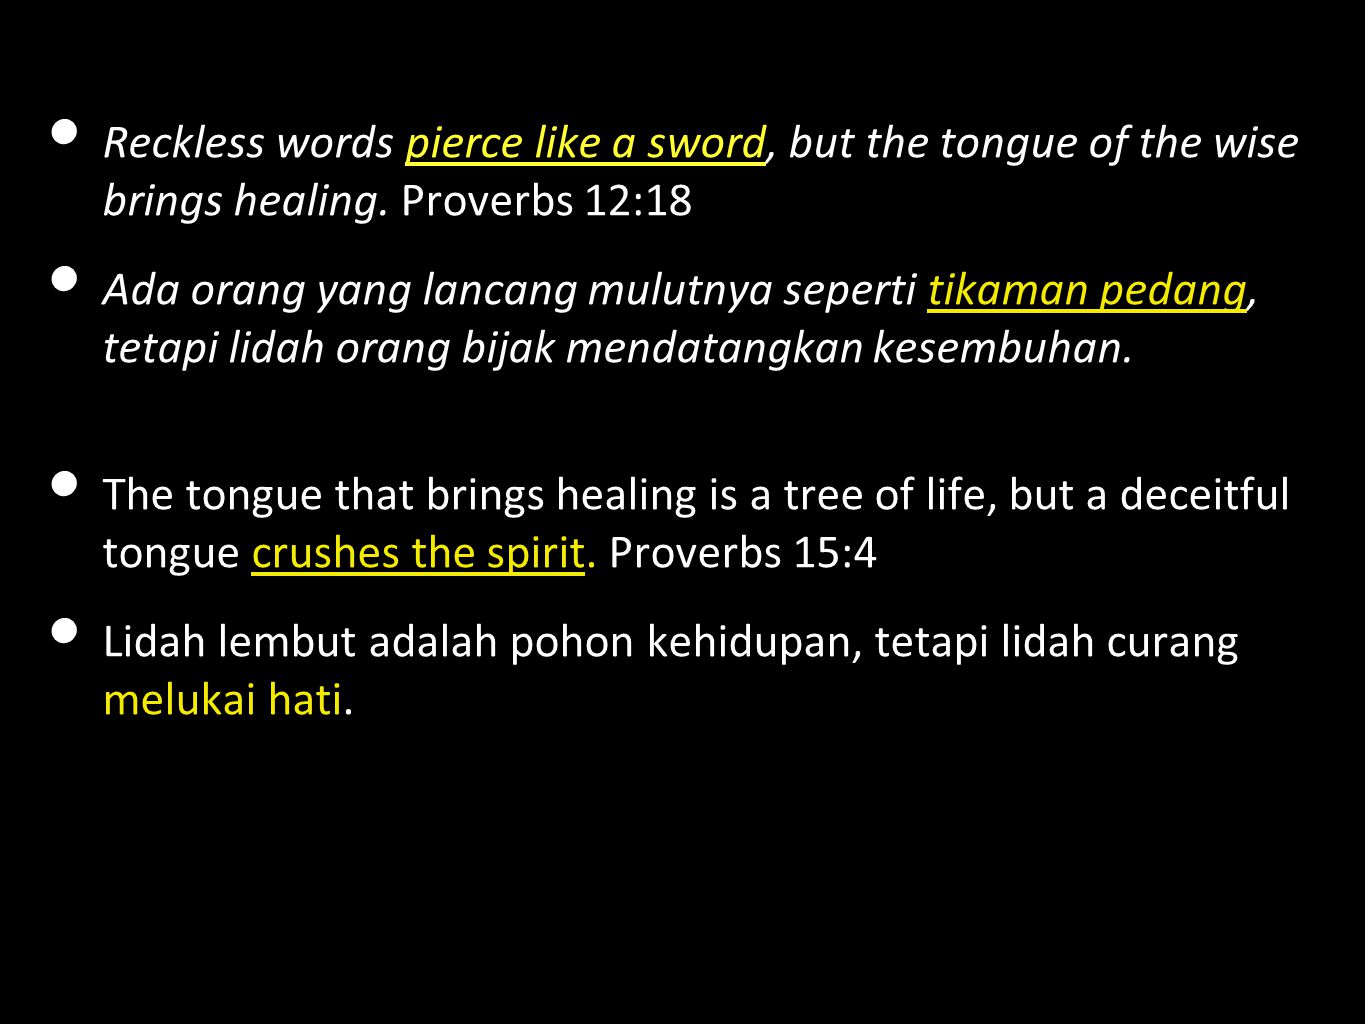 Reckless words pierce like a sword, but the tongue of the wise brings healing.